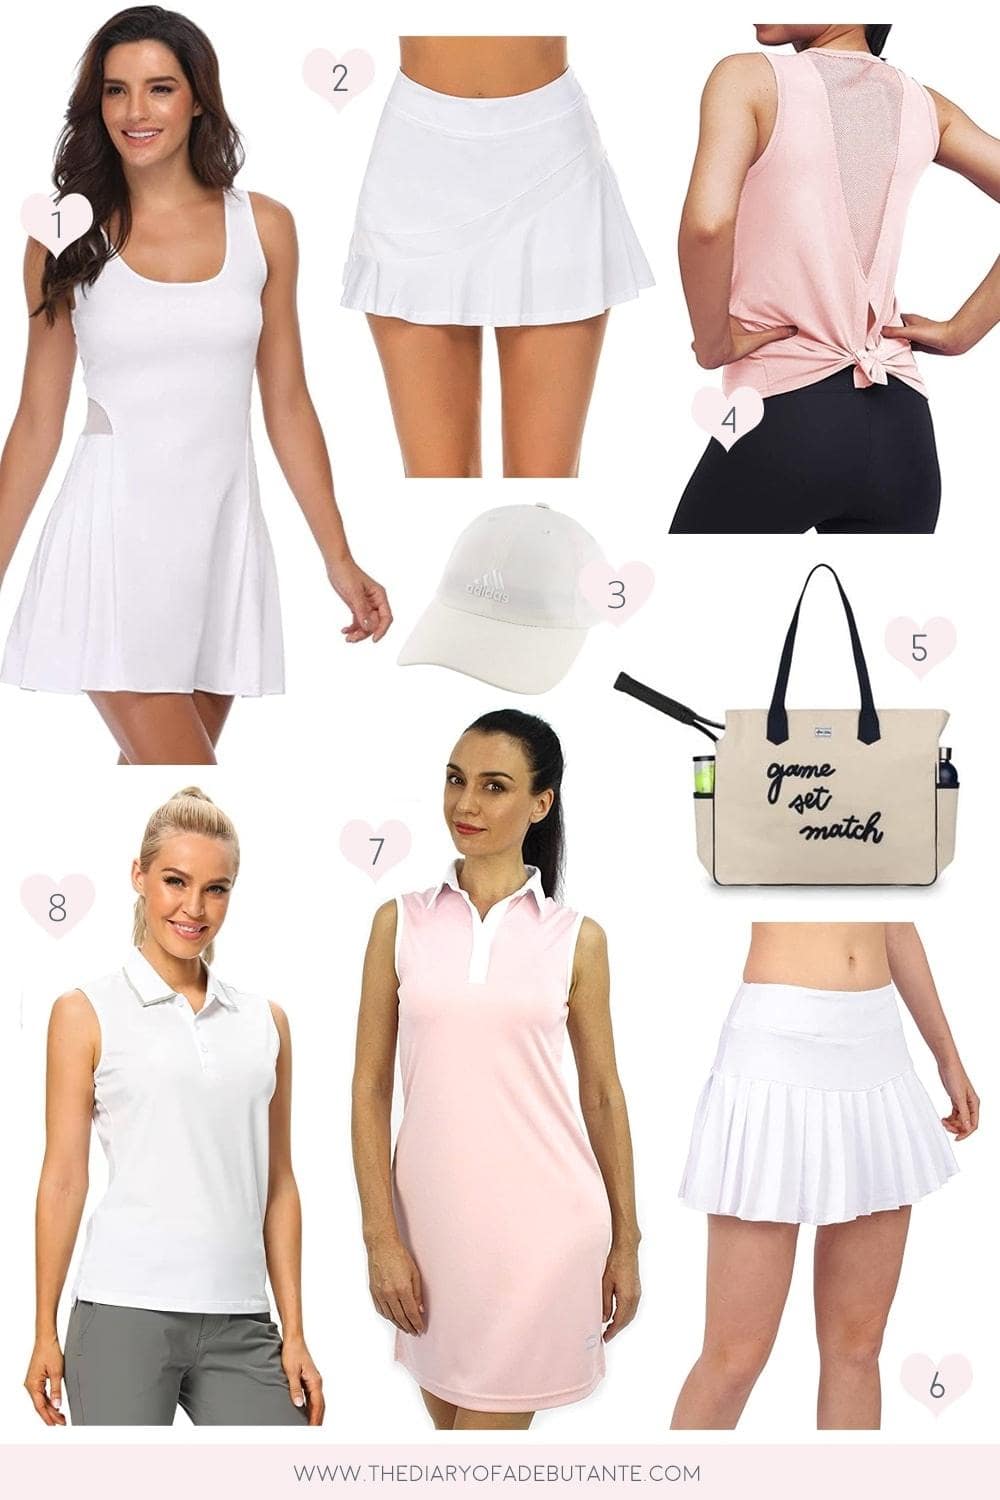 Affordable fashion blogger Stephanie Ziajka shares over a dozen cute tennis outfits and accessories on Diary of a Debutante